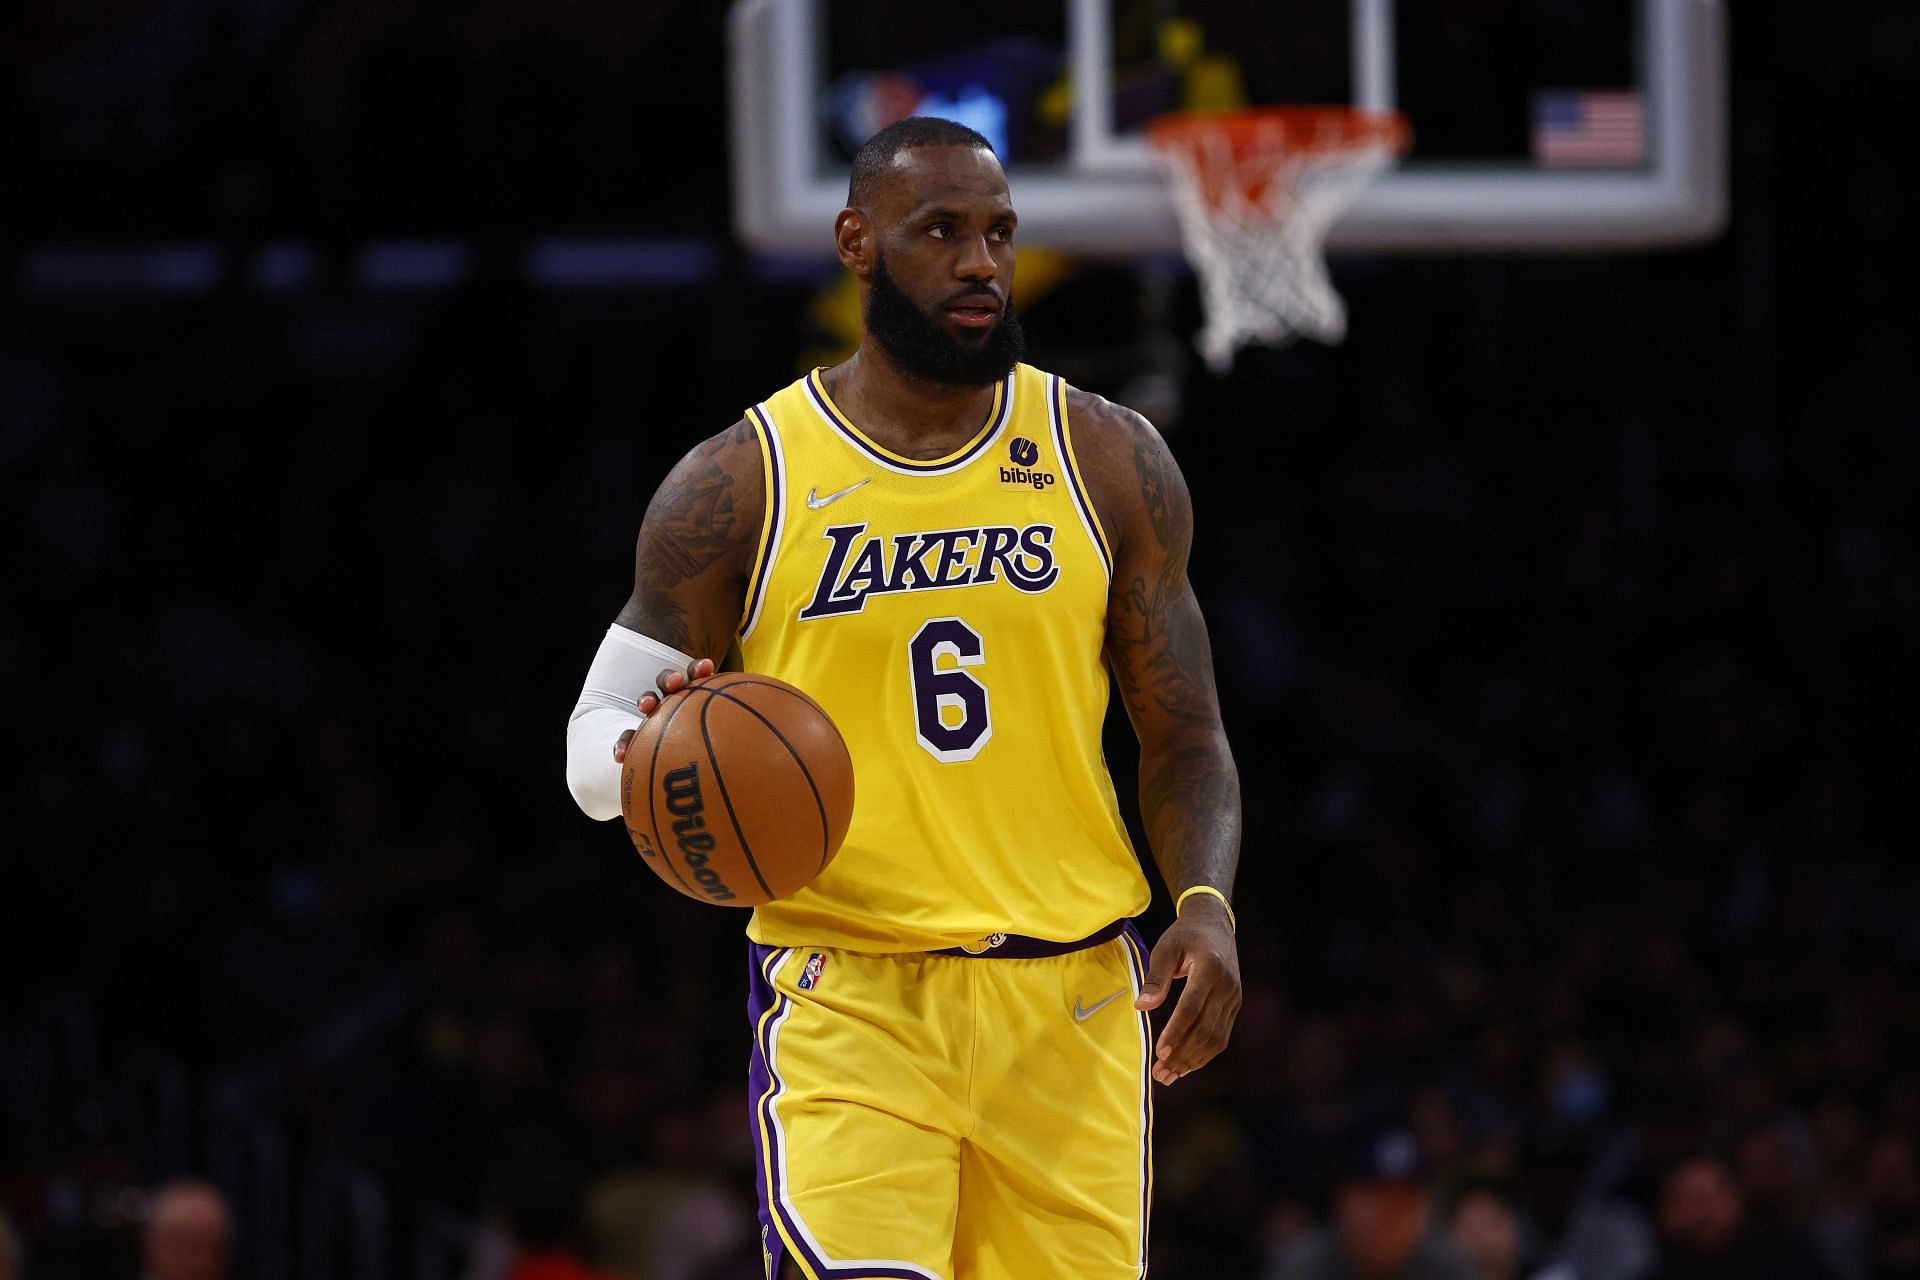 LeBron James and the LA Lakers suffered a disappointing loss to the LA Lakers on Wednesday